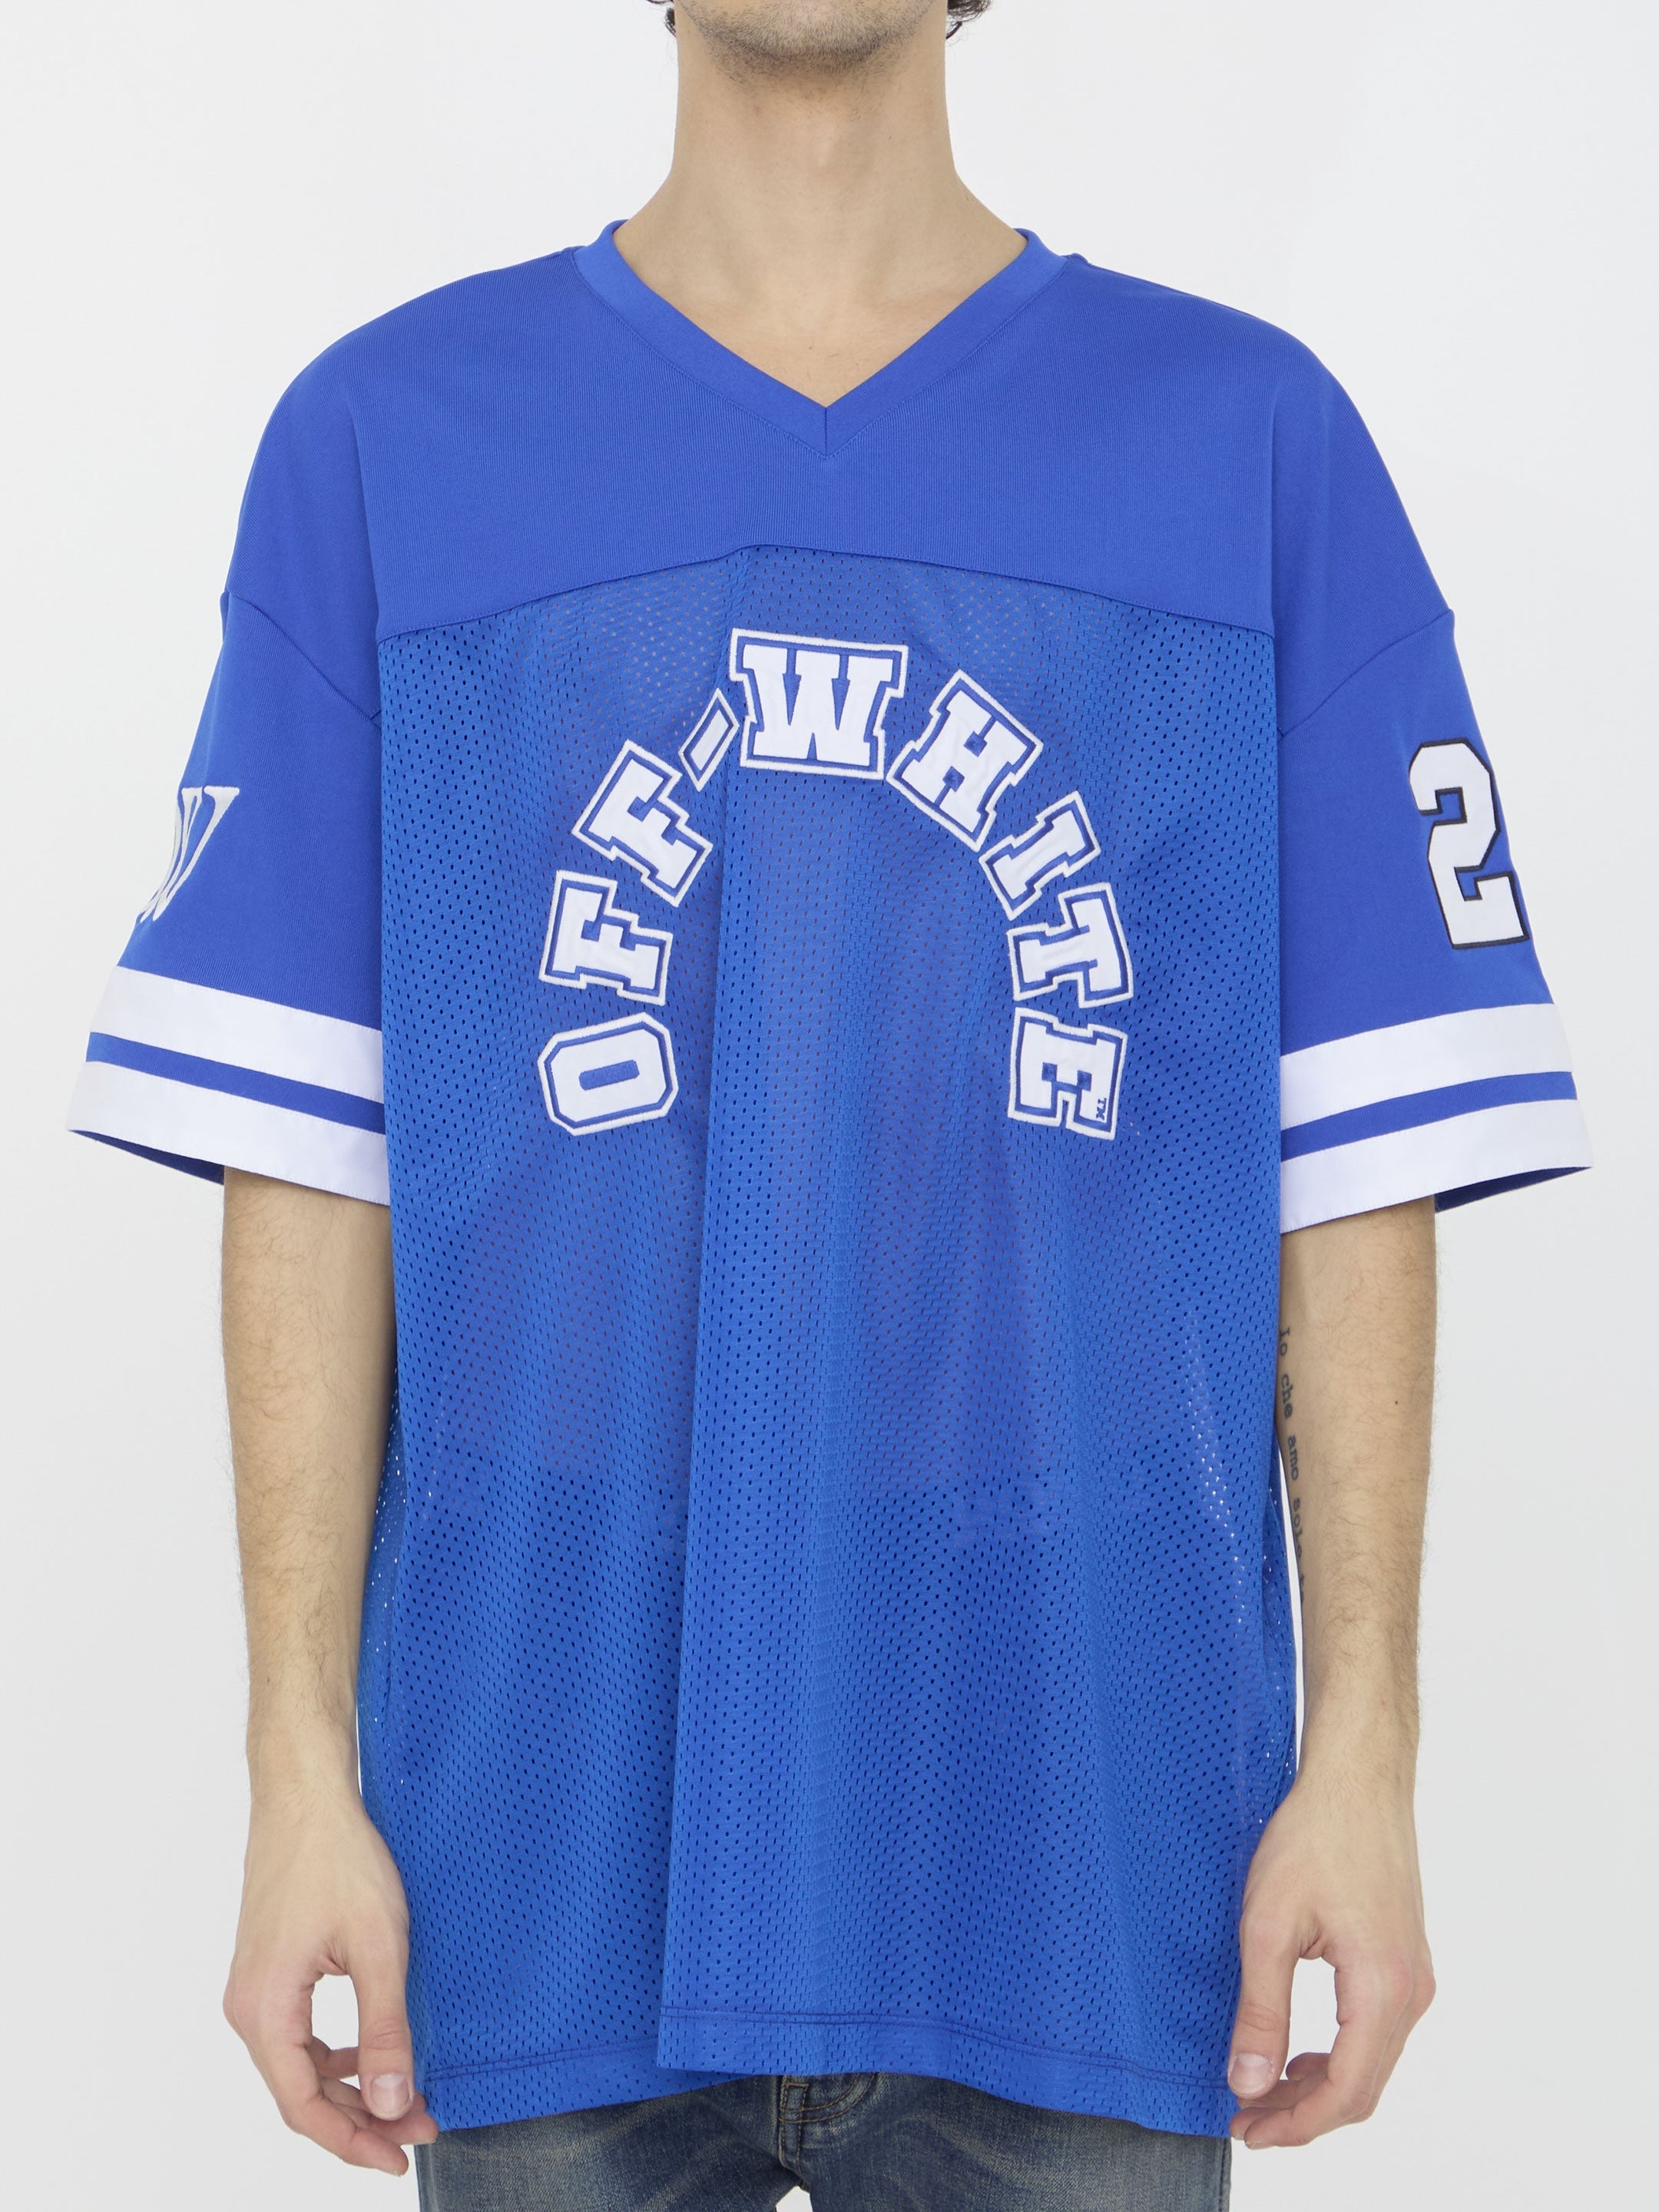 OFF-WHITE-OUTLET-SALE-Football-Mesh-t-shirt-Shirts-M-LIGHT-BLUE-ARCHIVE-COLLECTION.jpg